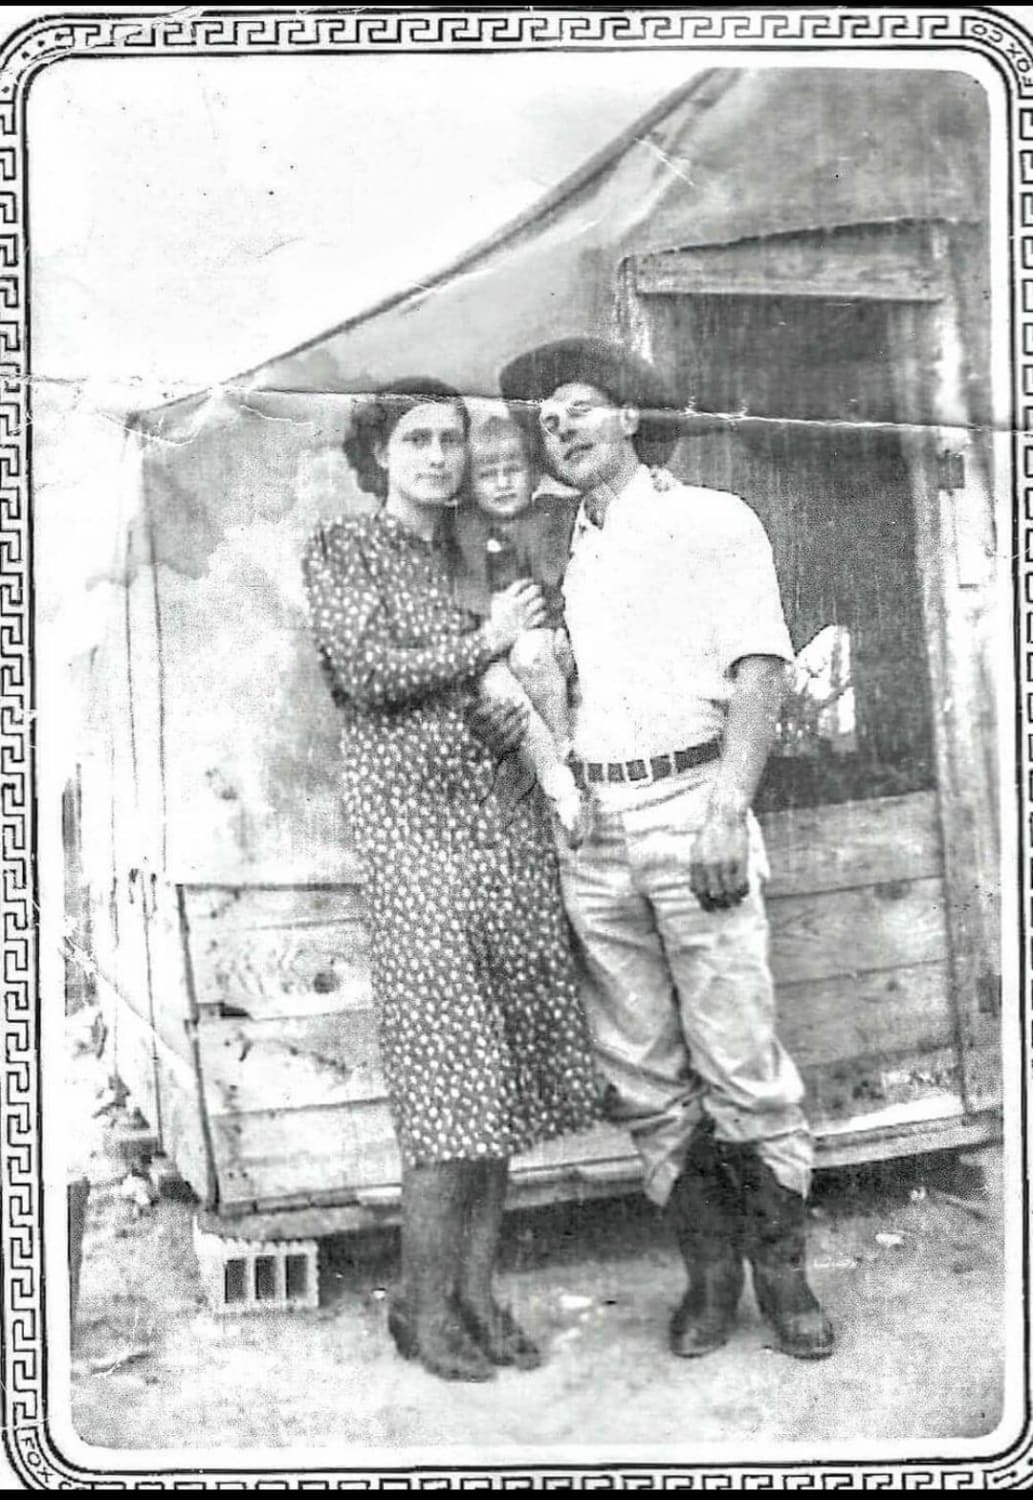 1936. The Magnolia Camp, Freer Tx. My grandparents and Mom in front. of their tent. It was an Oil boom and the Depression. But they were happy. Married 68 yrs. The best people I've ever known.